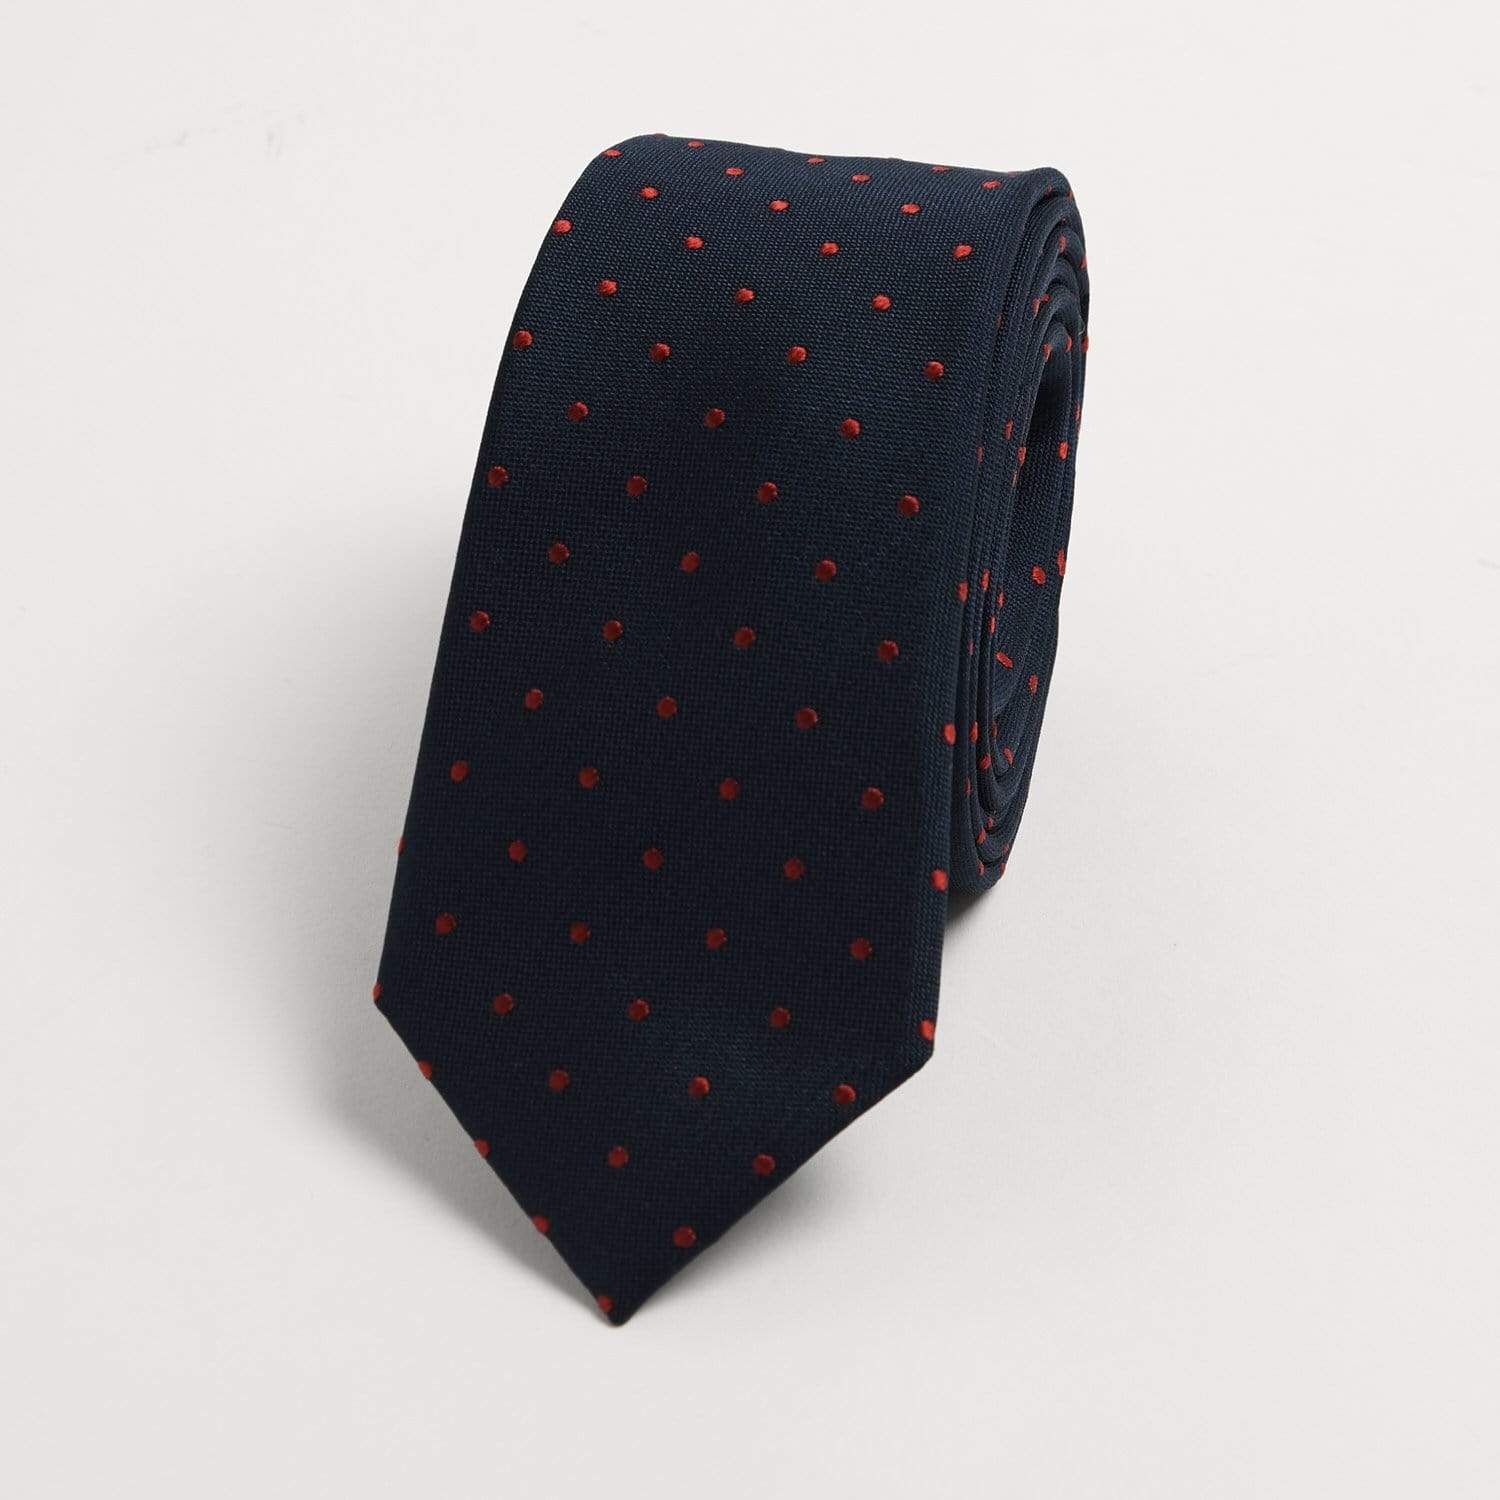 T.M.Lewin-Spaced-Spot-Tie-Navy-and-Red-63399-008